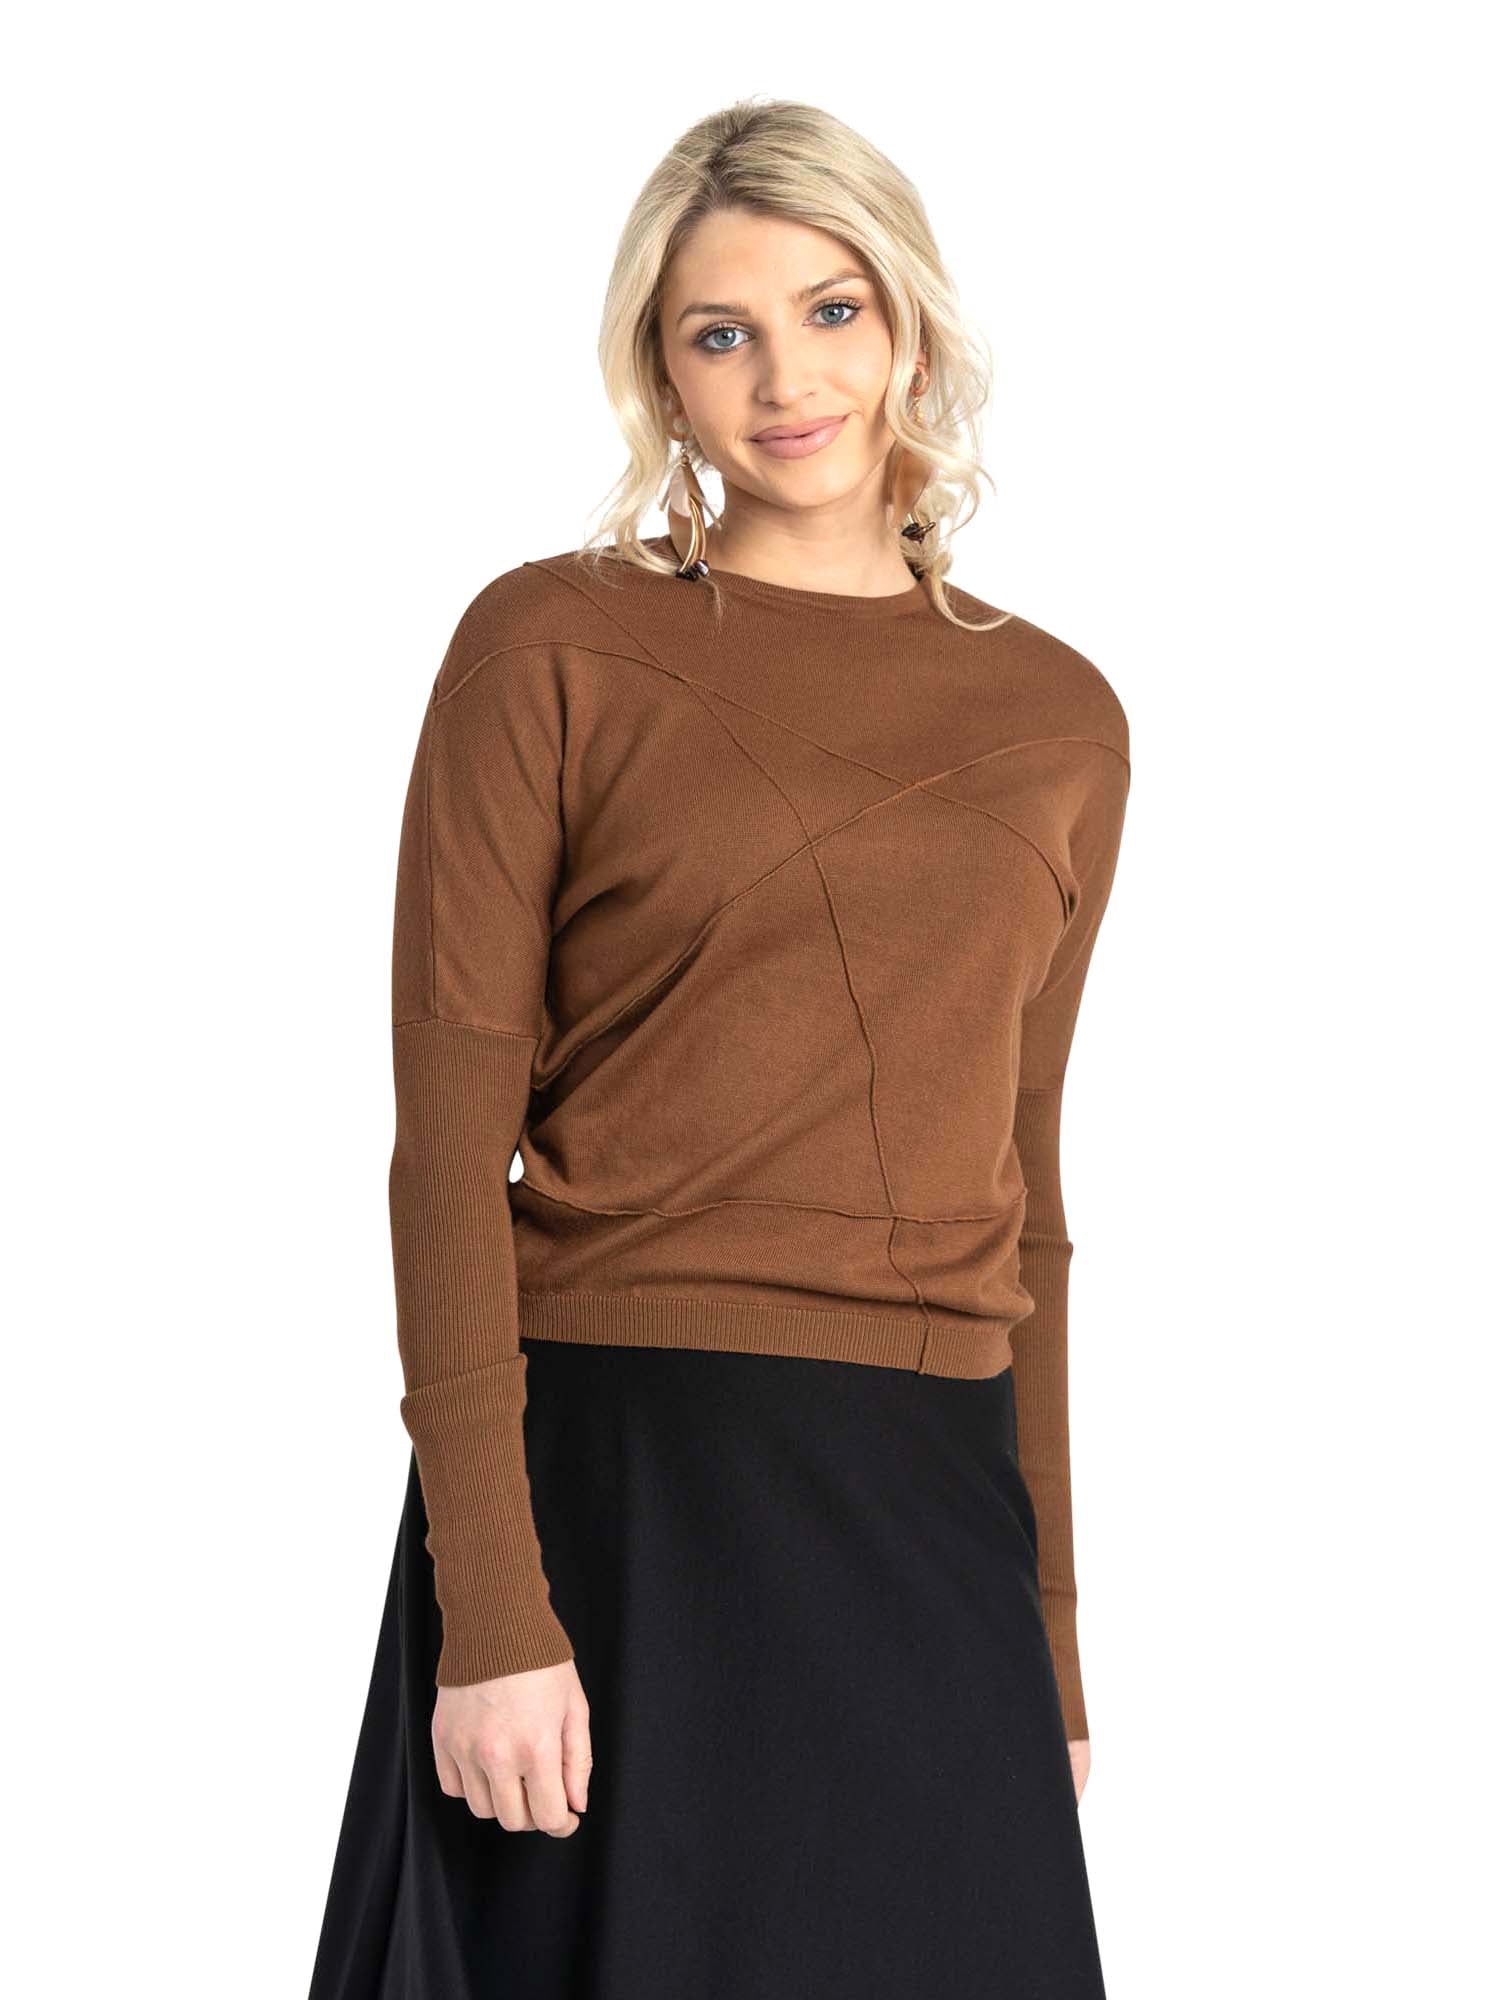 EUX Seamed Dolman Knit Top - Tops